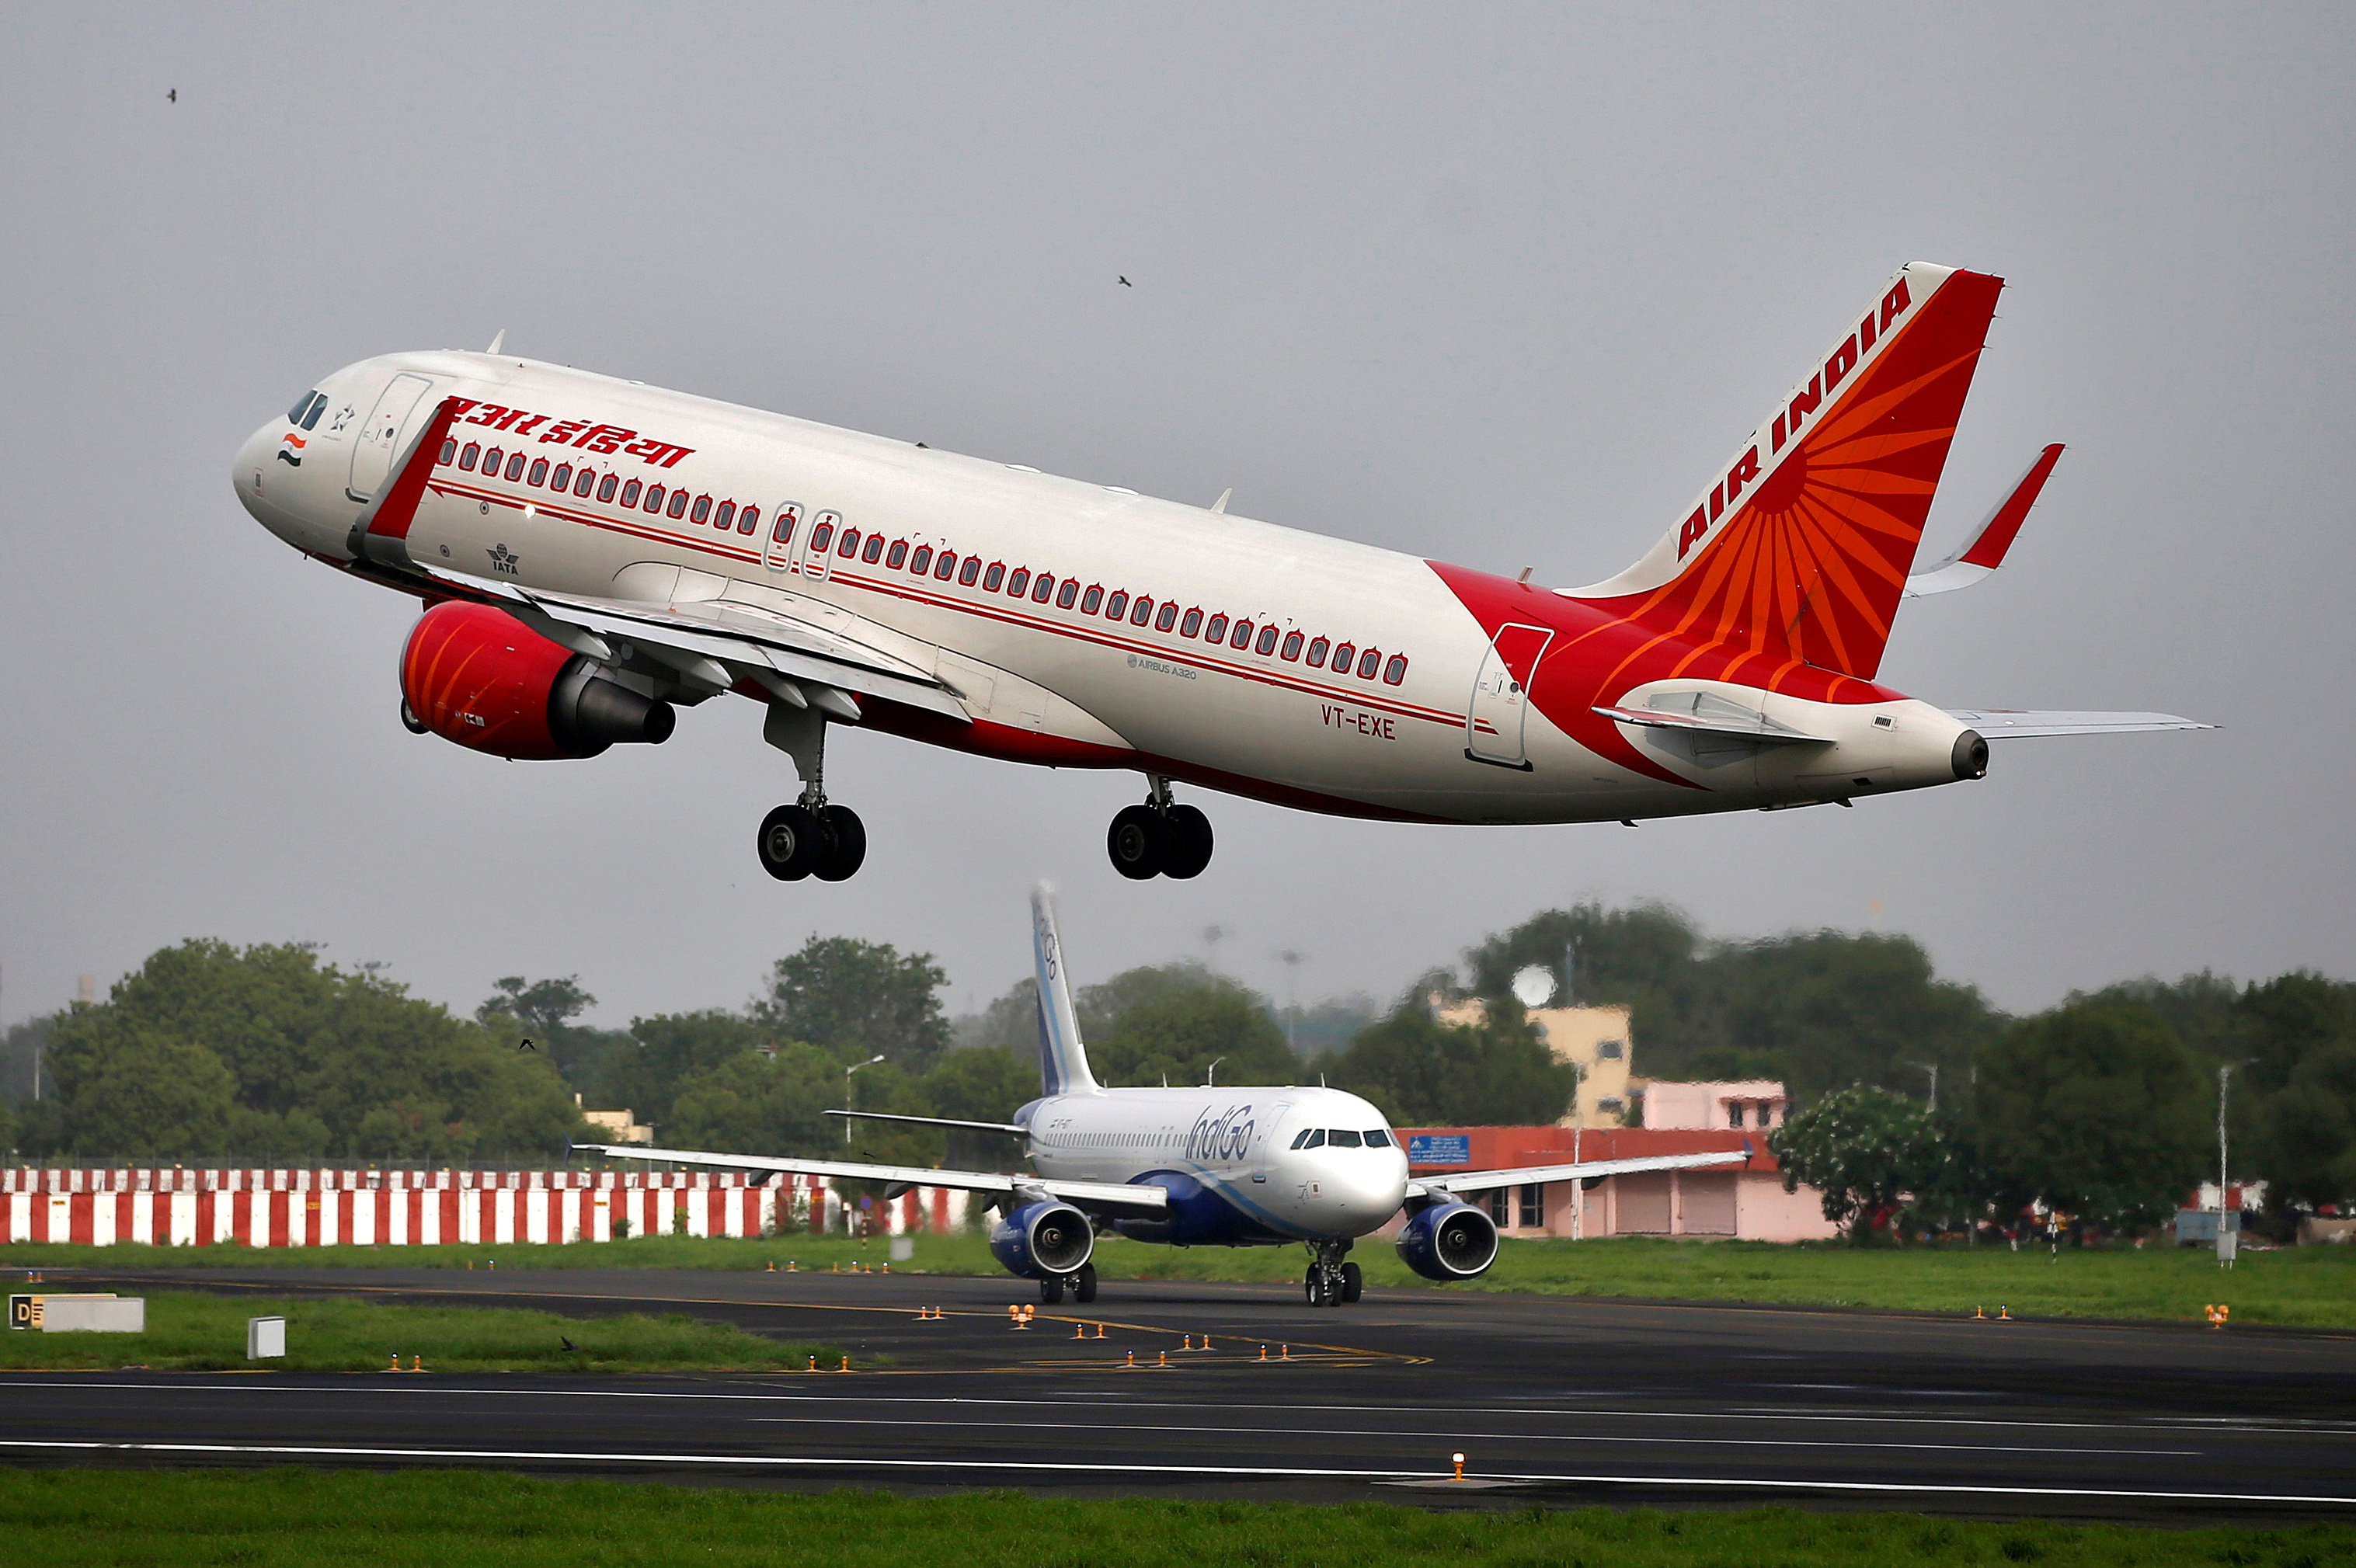 An Air India Airbus A320 aircraft takes off as an IndiGo Airlines aircraft waits for clearance at the Sardar Vallabhbhai Patel International Airport in Ahmedabad